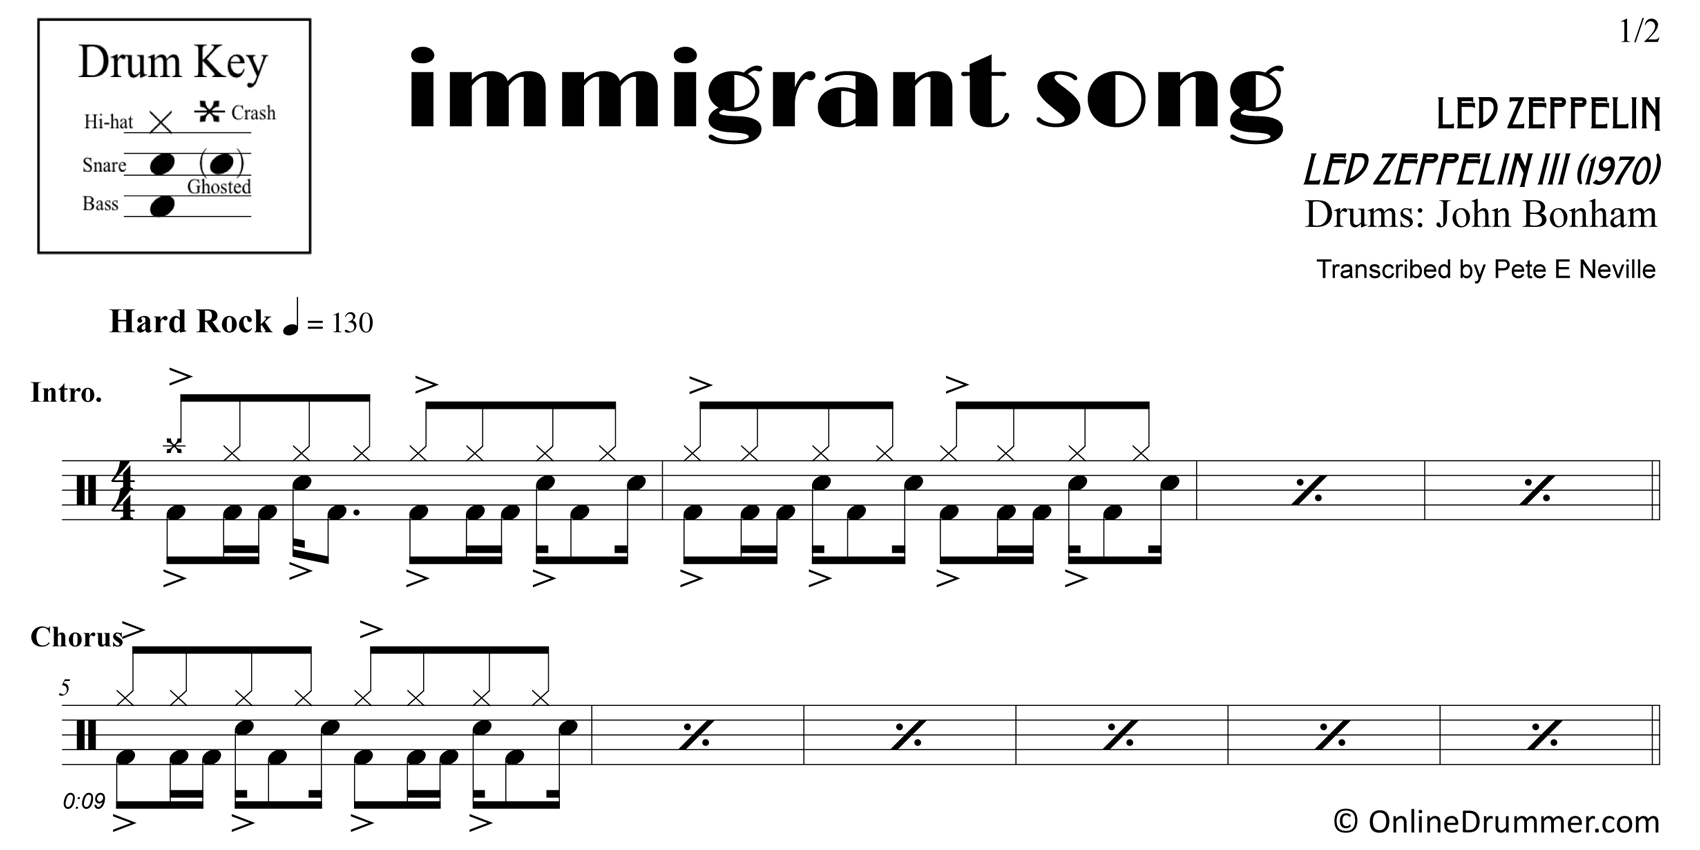 Immigrant Song - Led Zeppelin - Drum Sheet Music